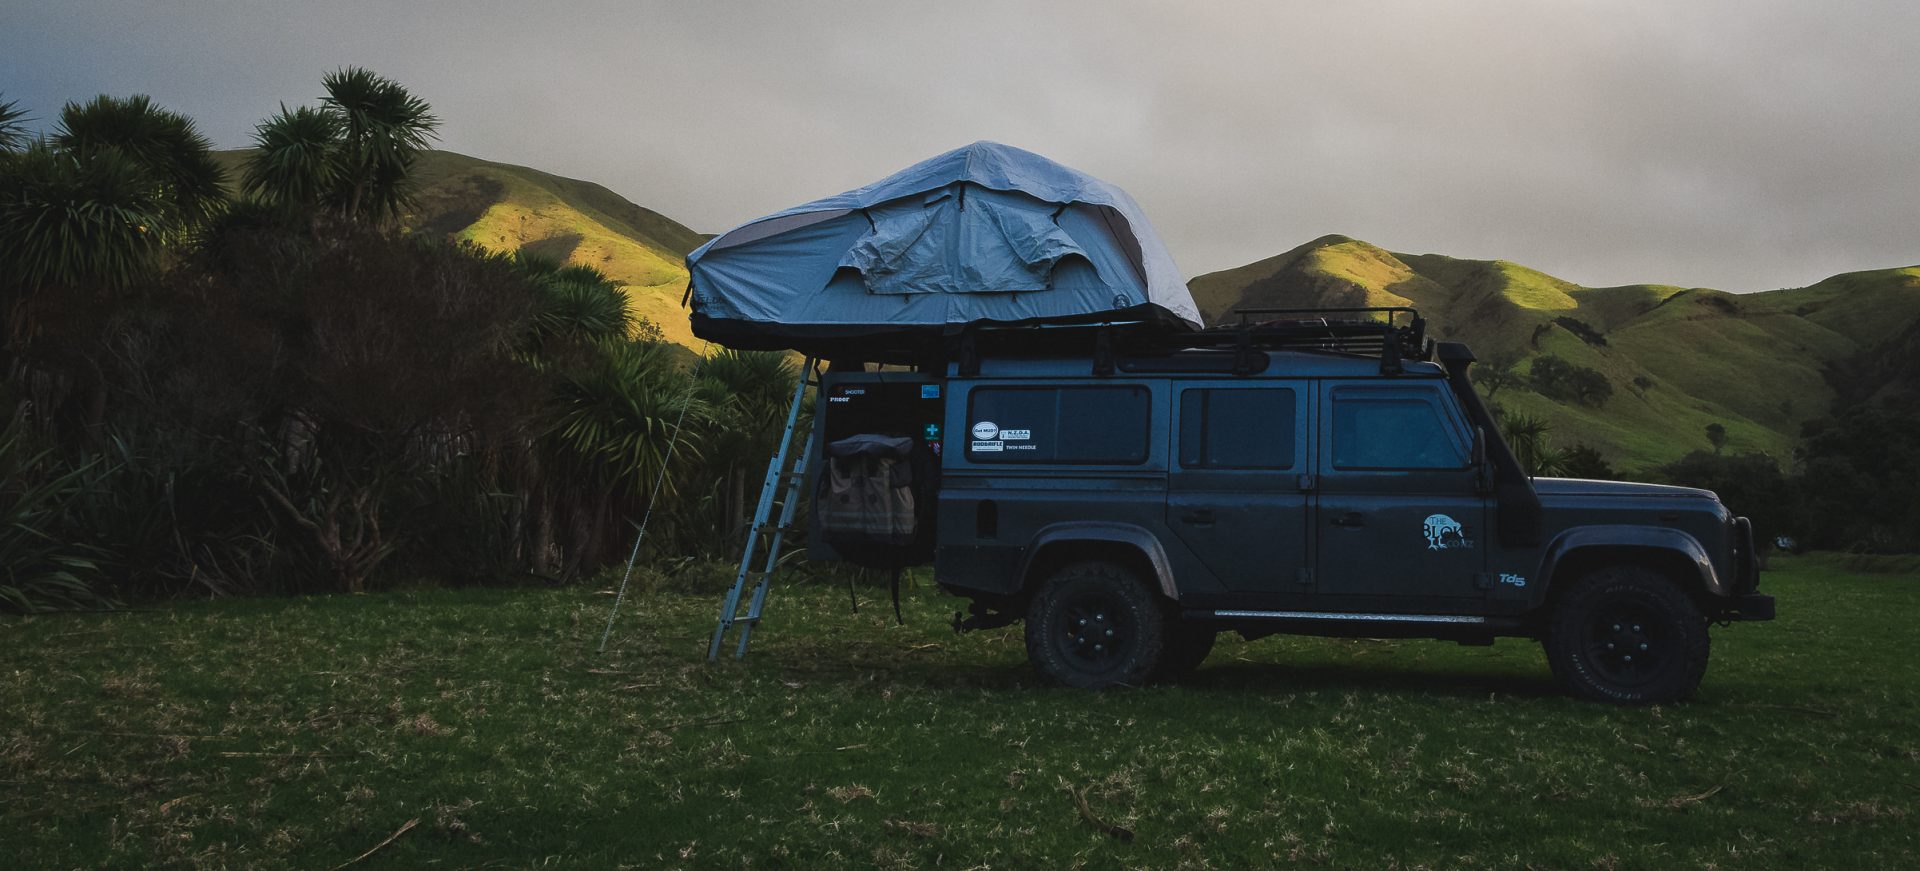 , The Feldon Rooftop Tent has gone. Why?